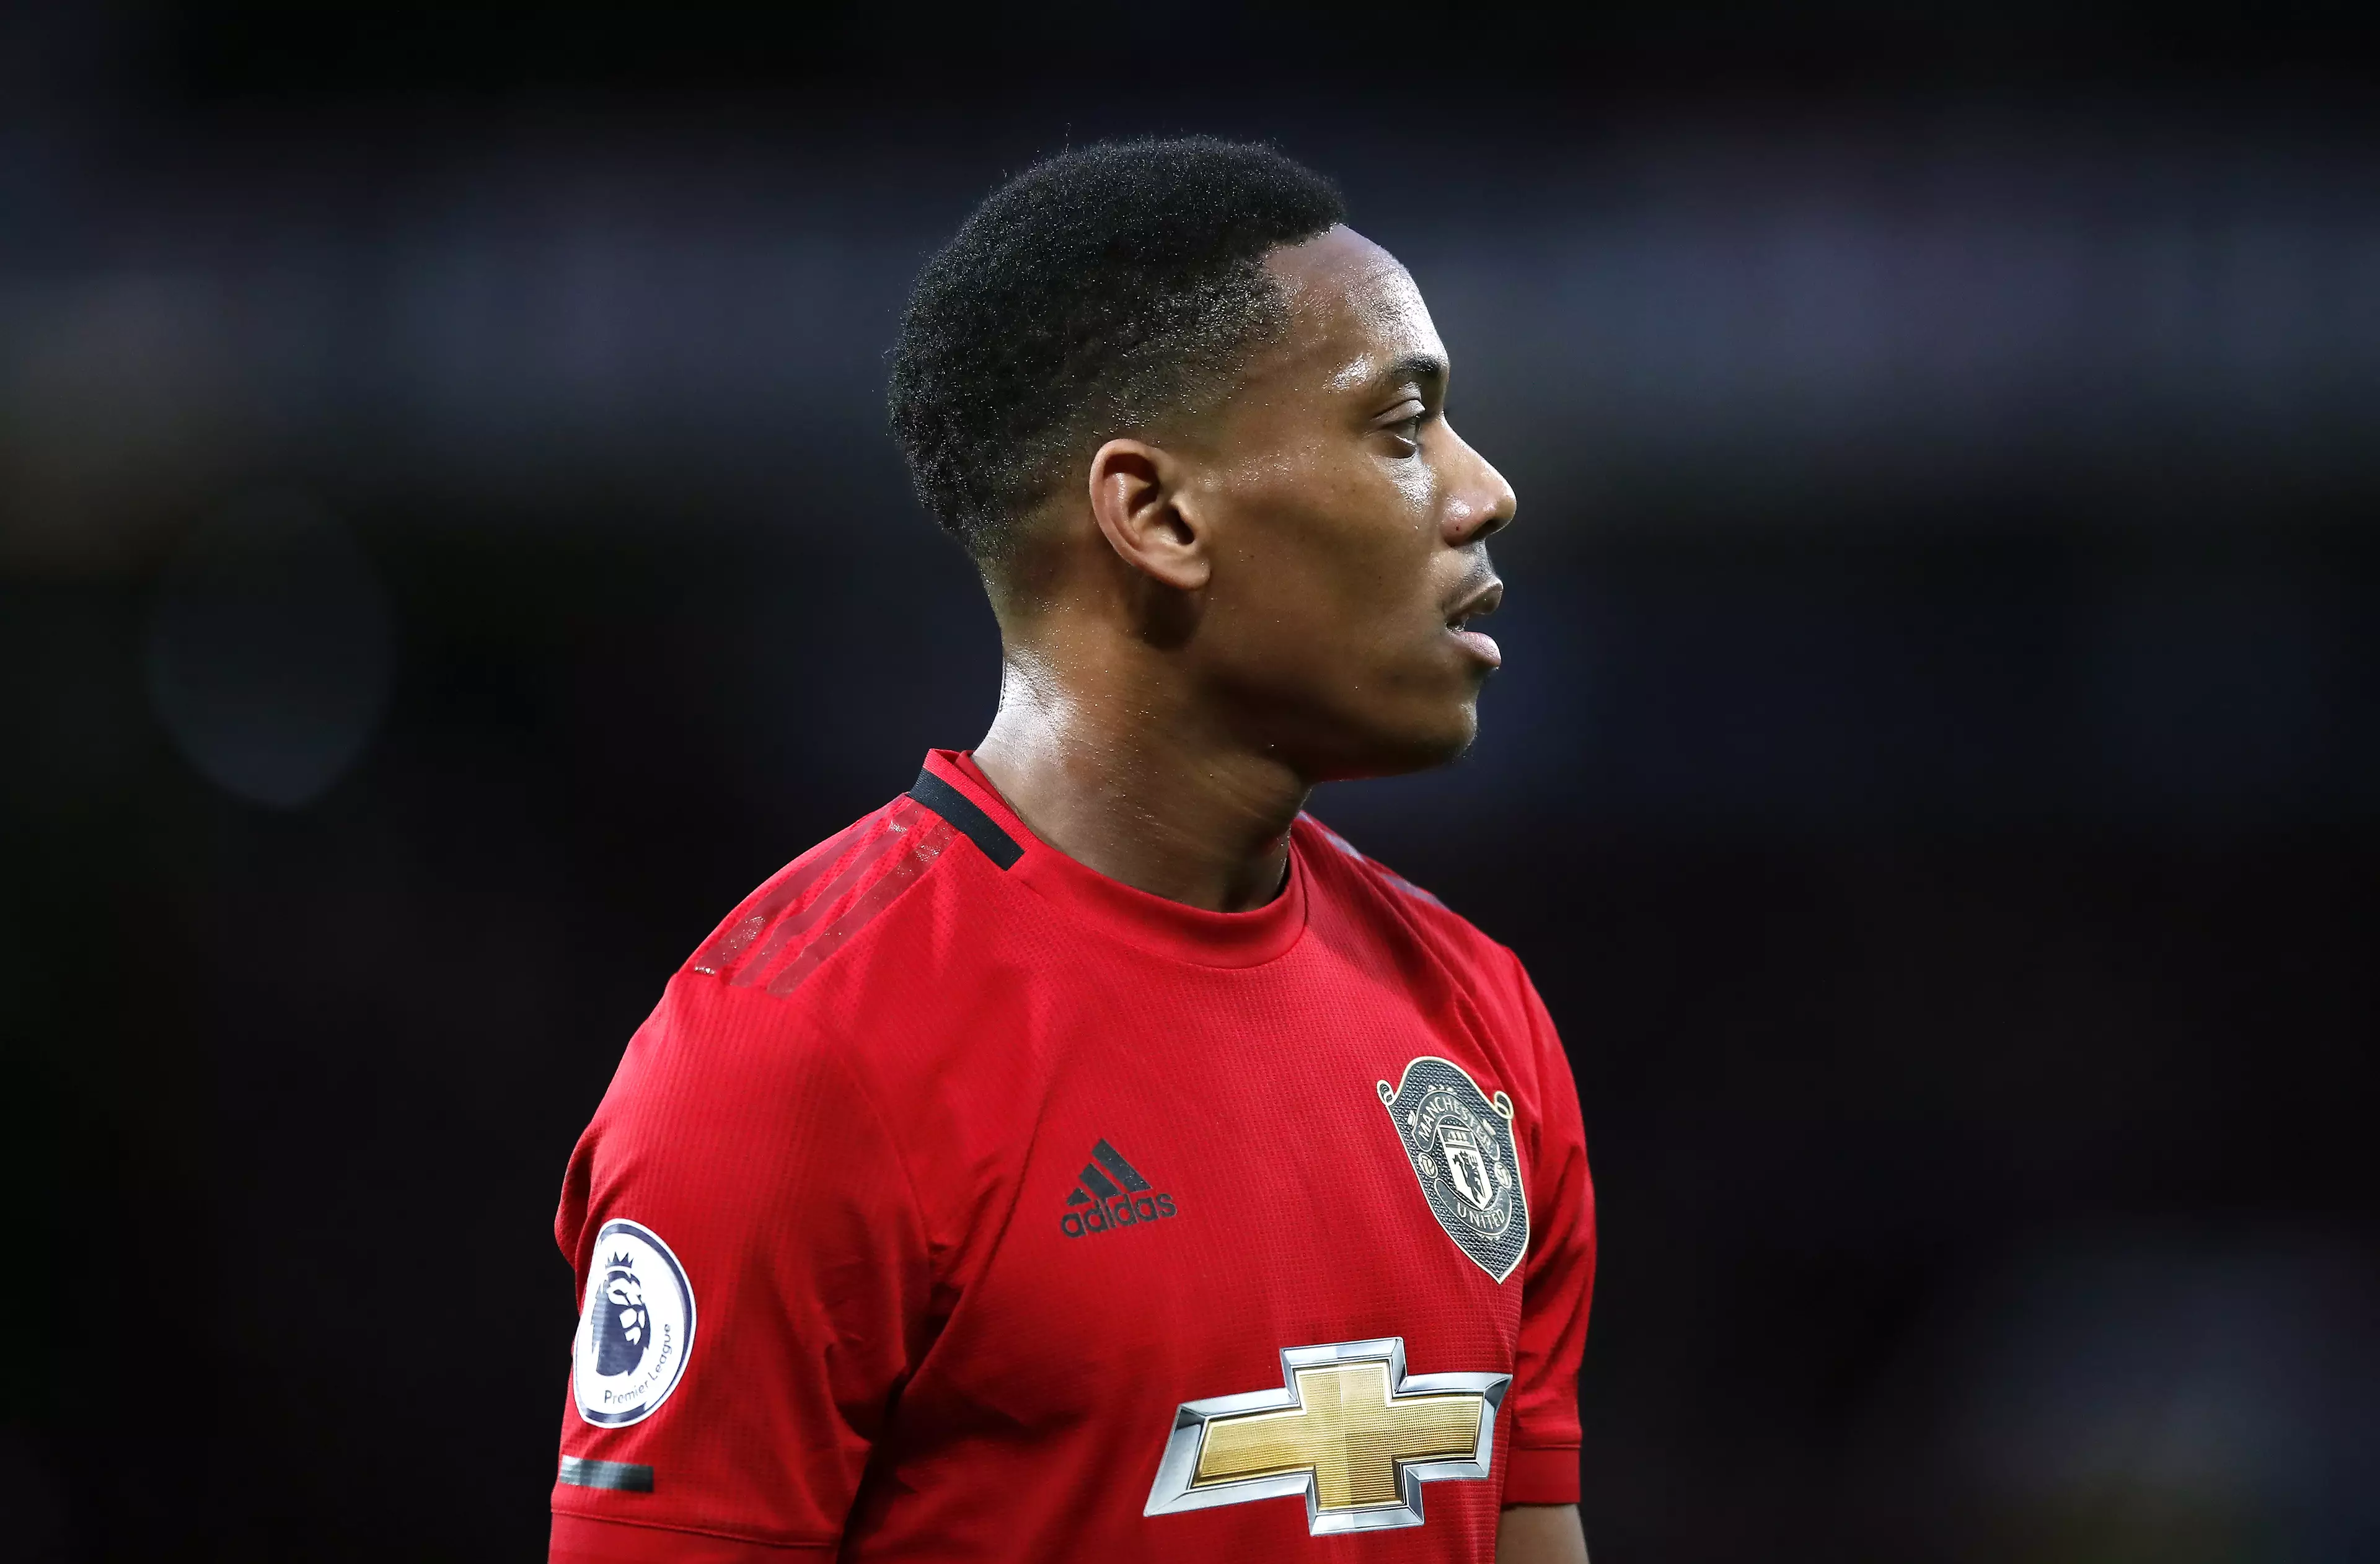 It's been a frustrating time for Martial. Image: PA Images